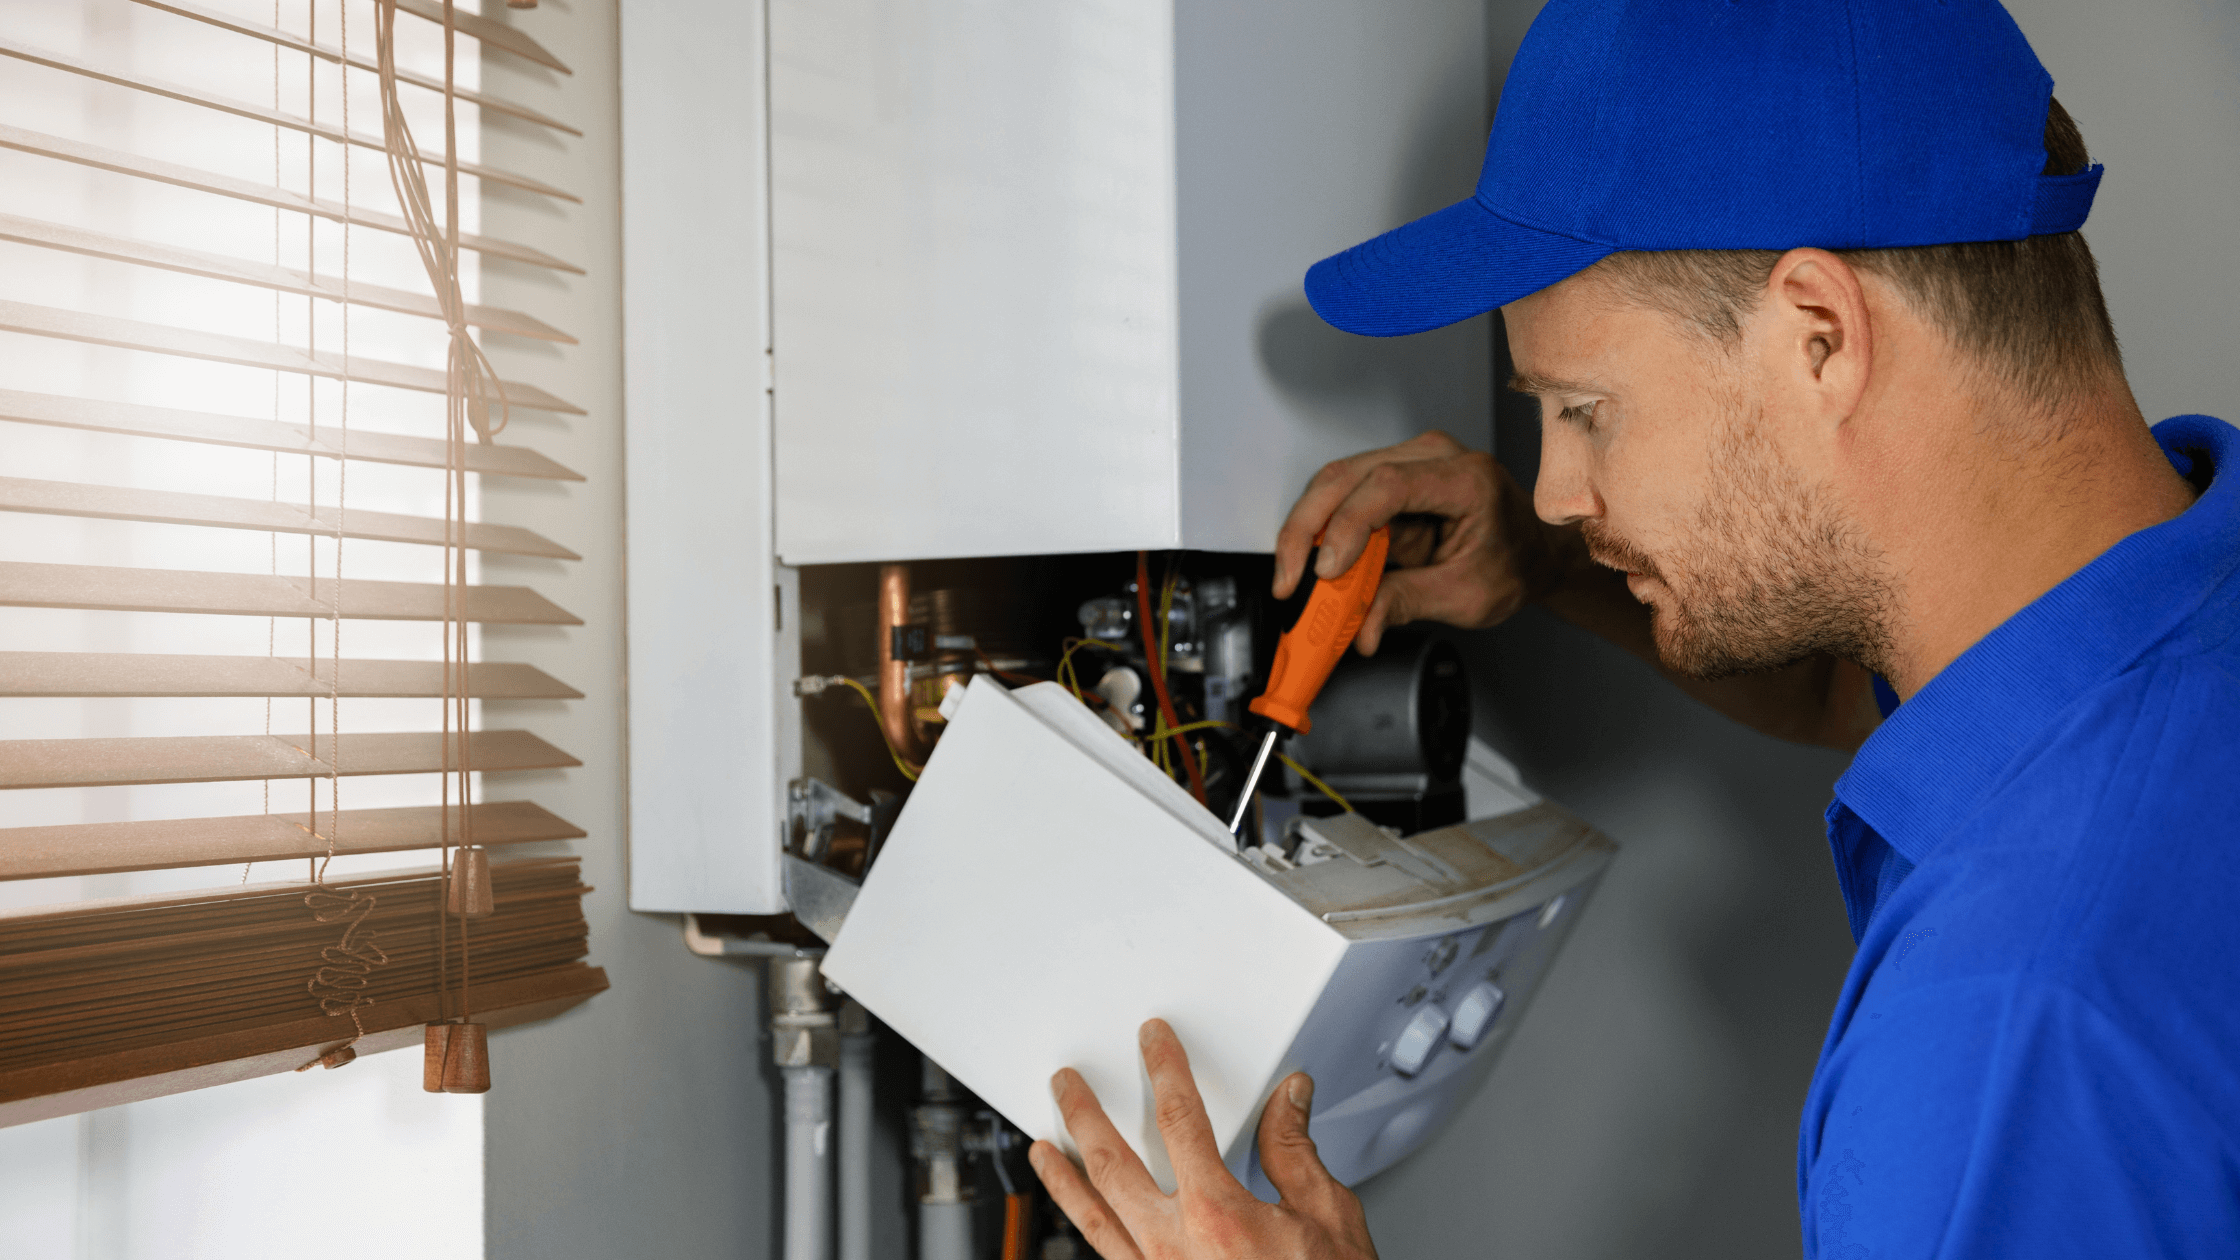 5 Reasons Why Working as a Gas Heating Engineer Could Be the Career for You